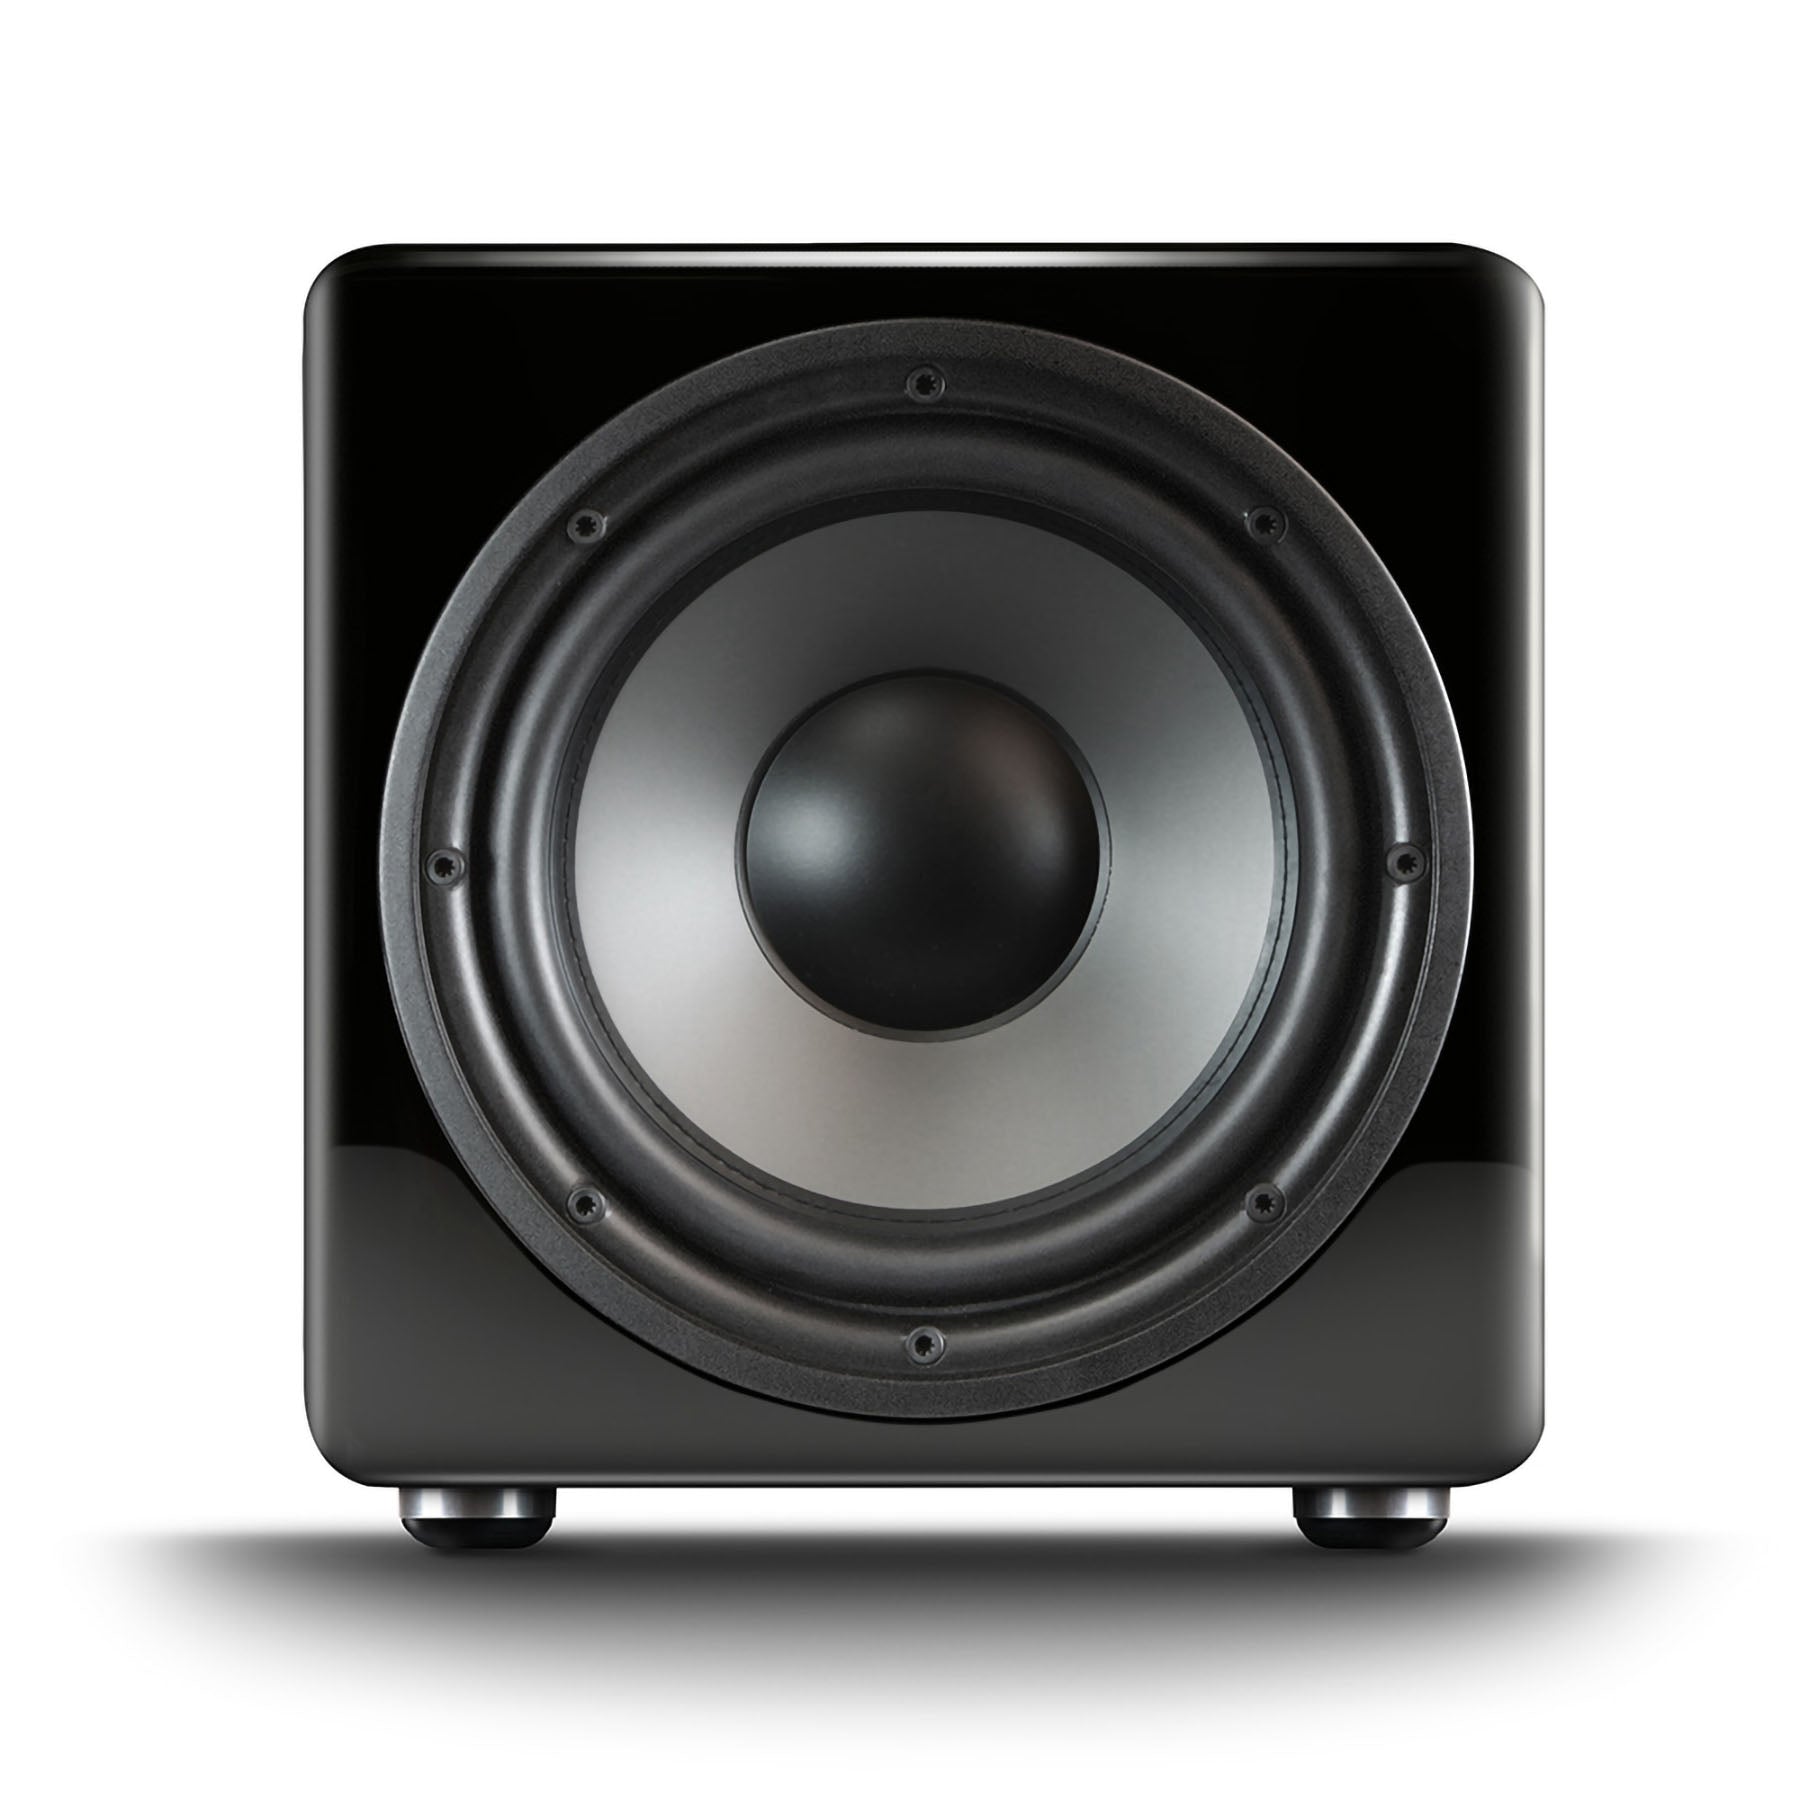 PSB SubSeries 450 – 12 Inch DSP Subwoofer